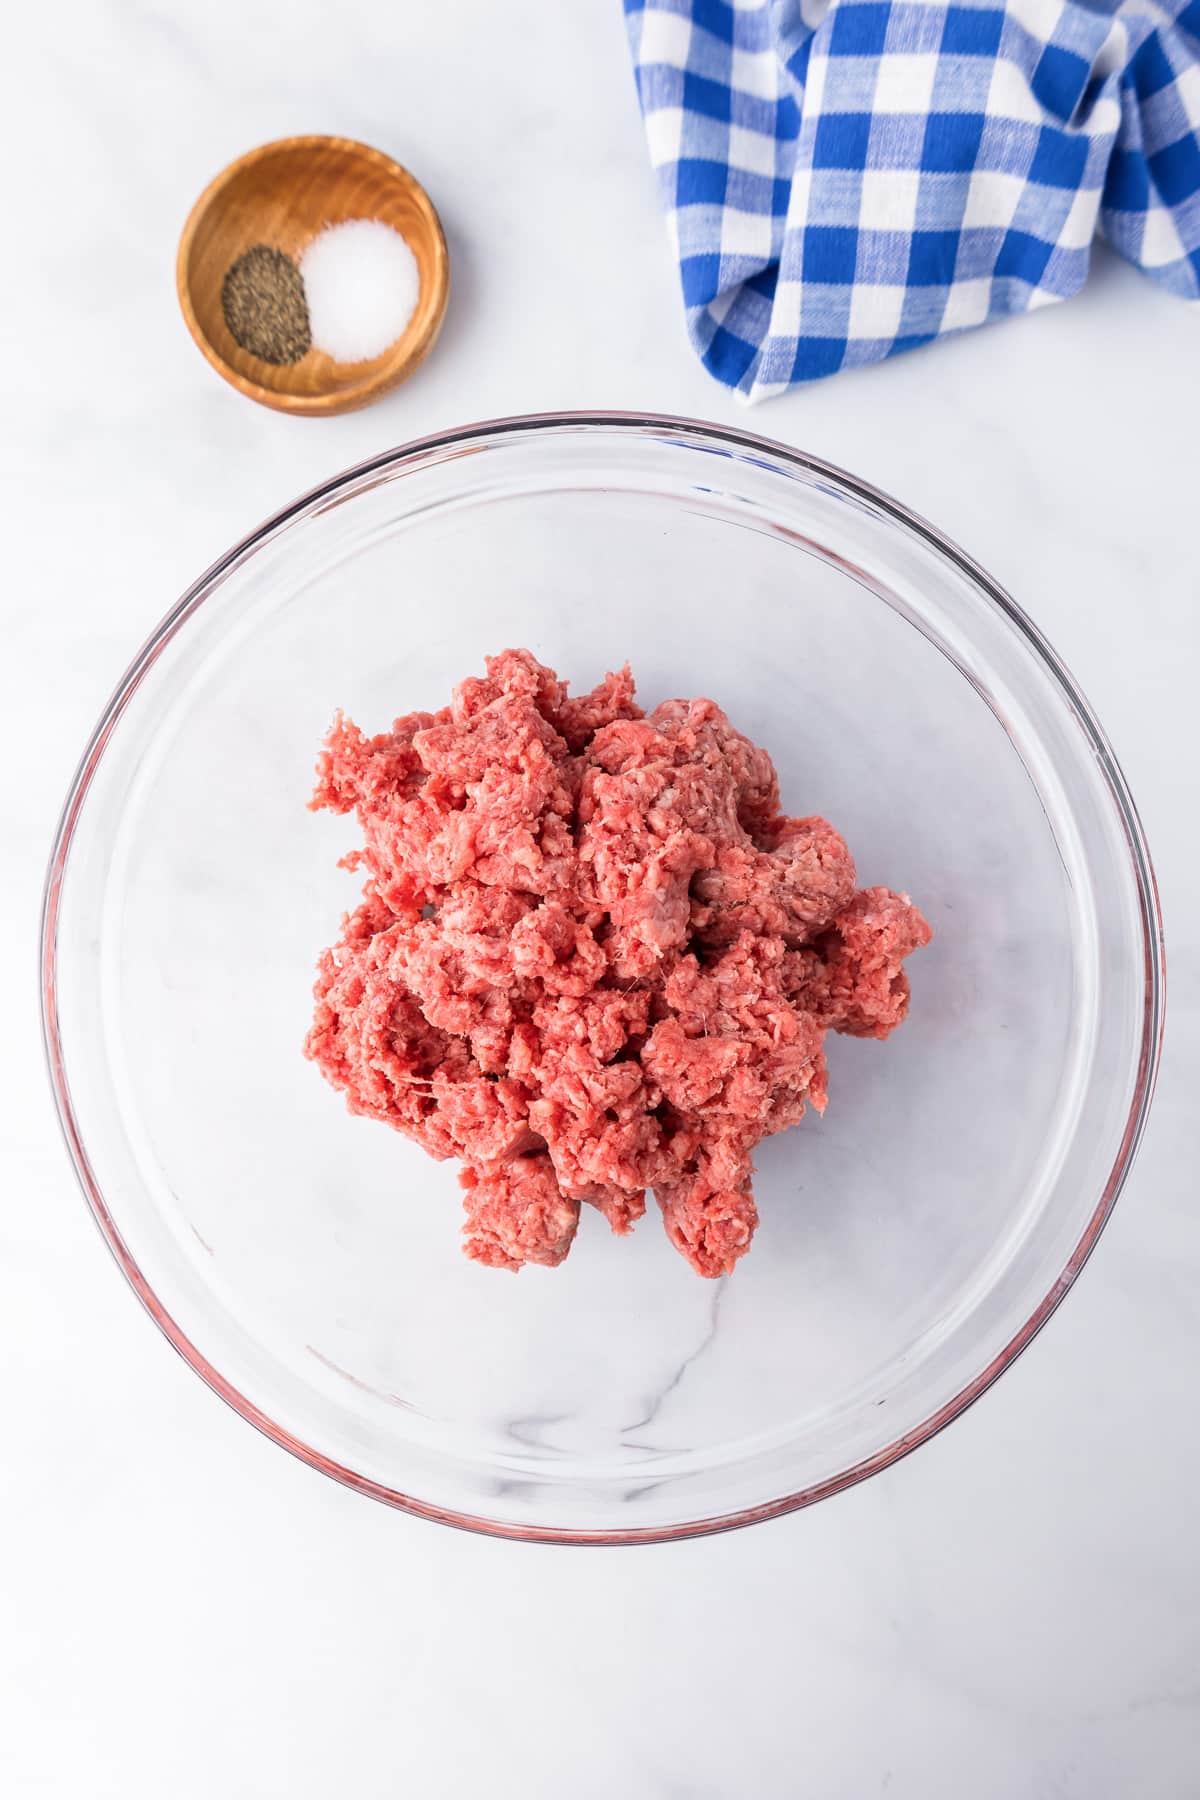 Ground beef in bowl with salt and pepper and a napkin on the counter nearby.